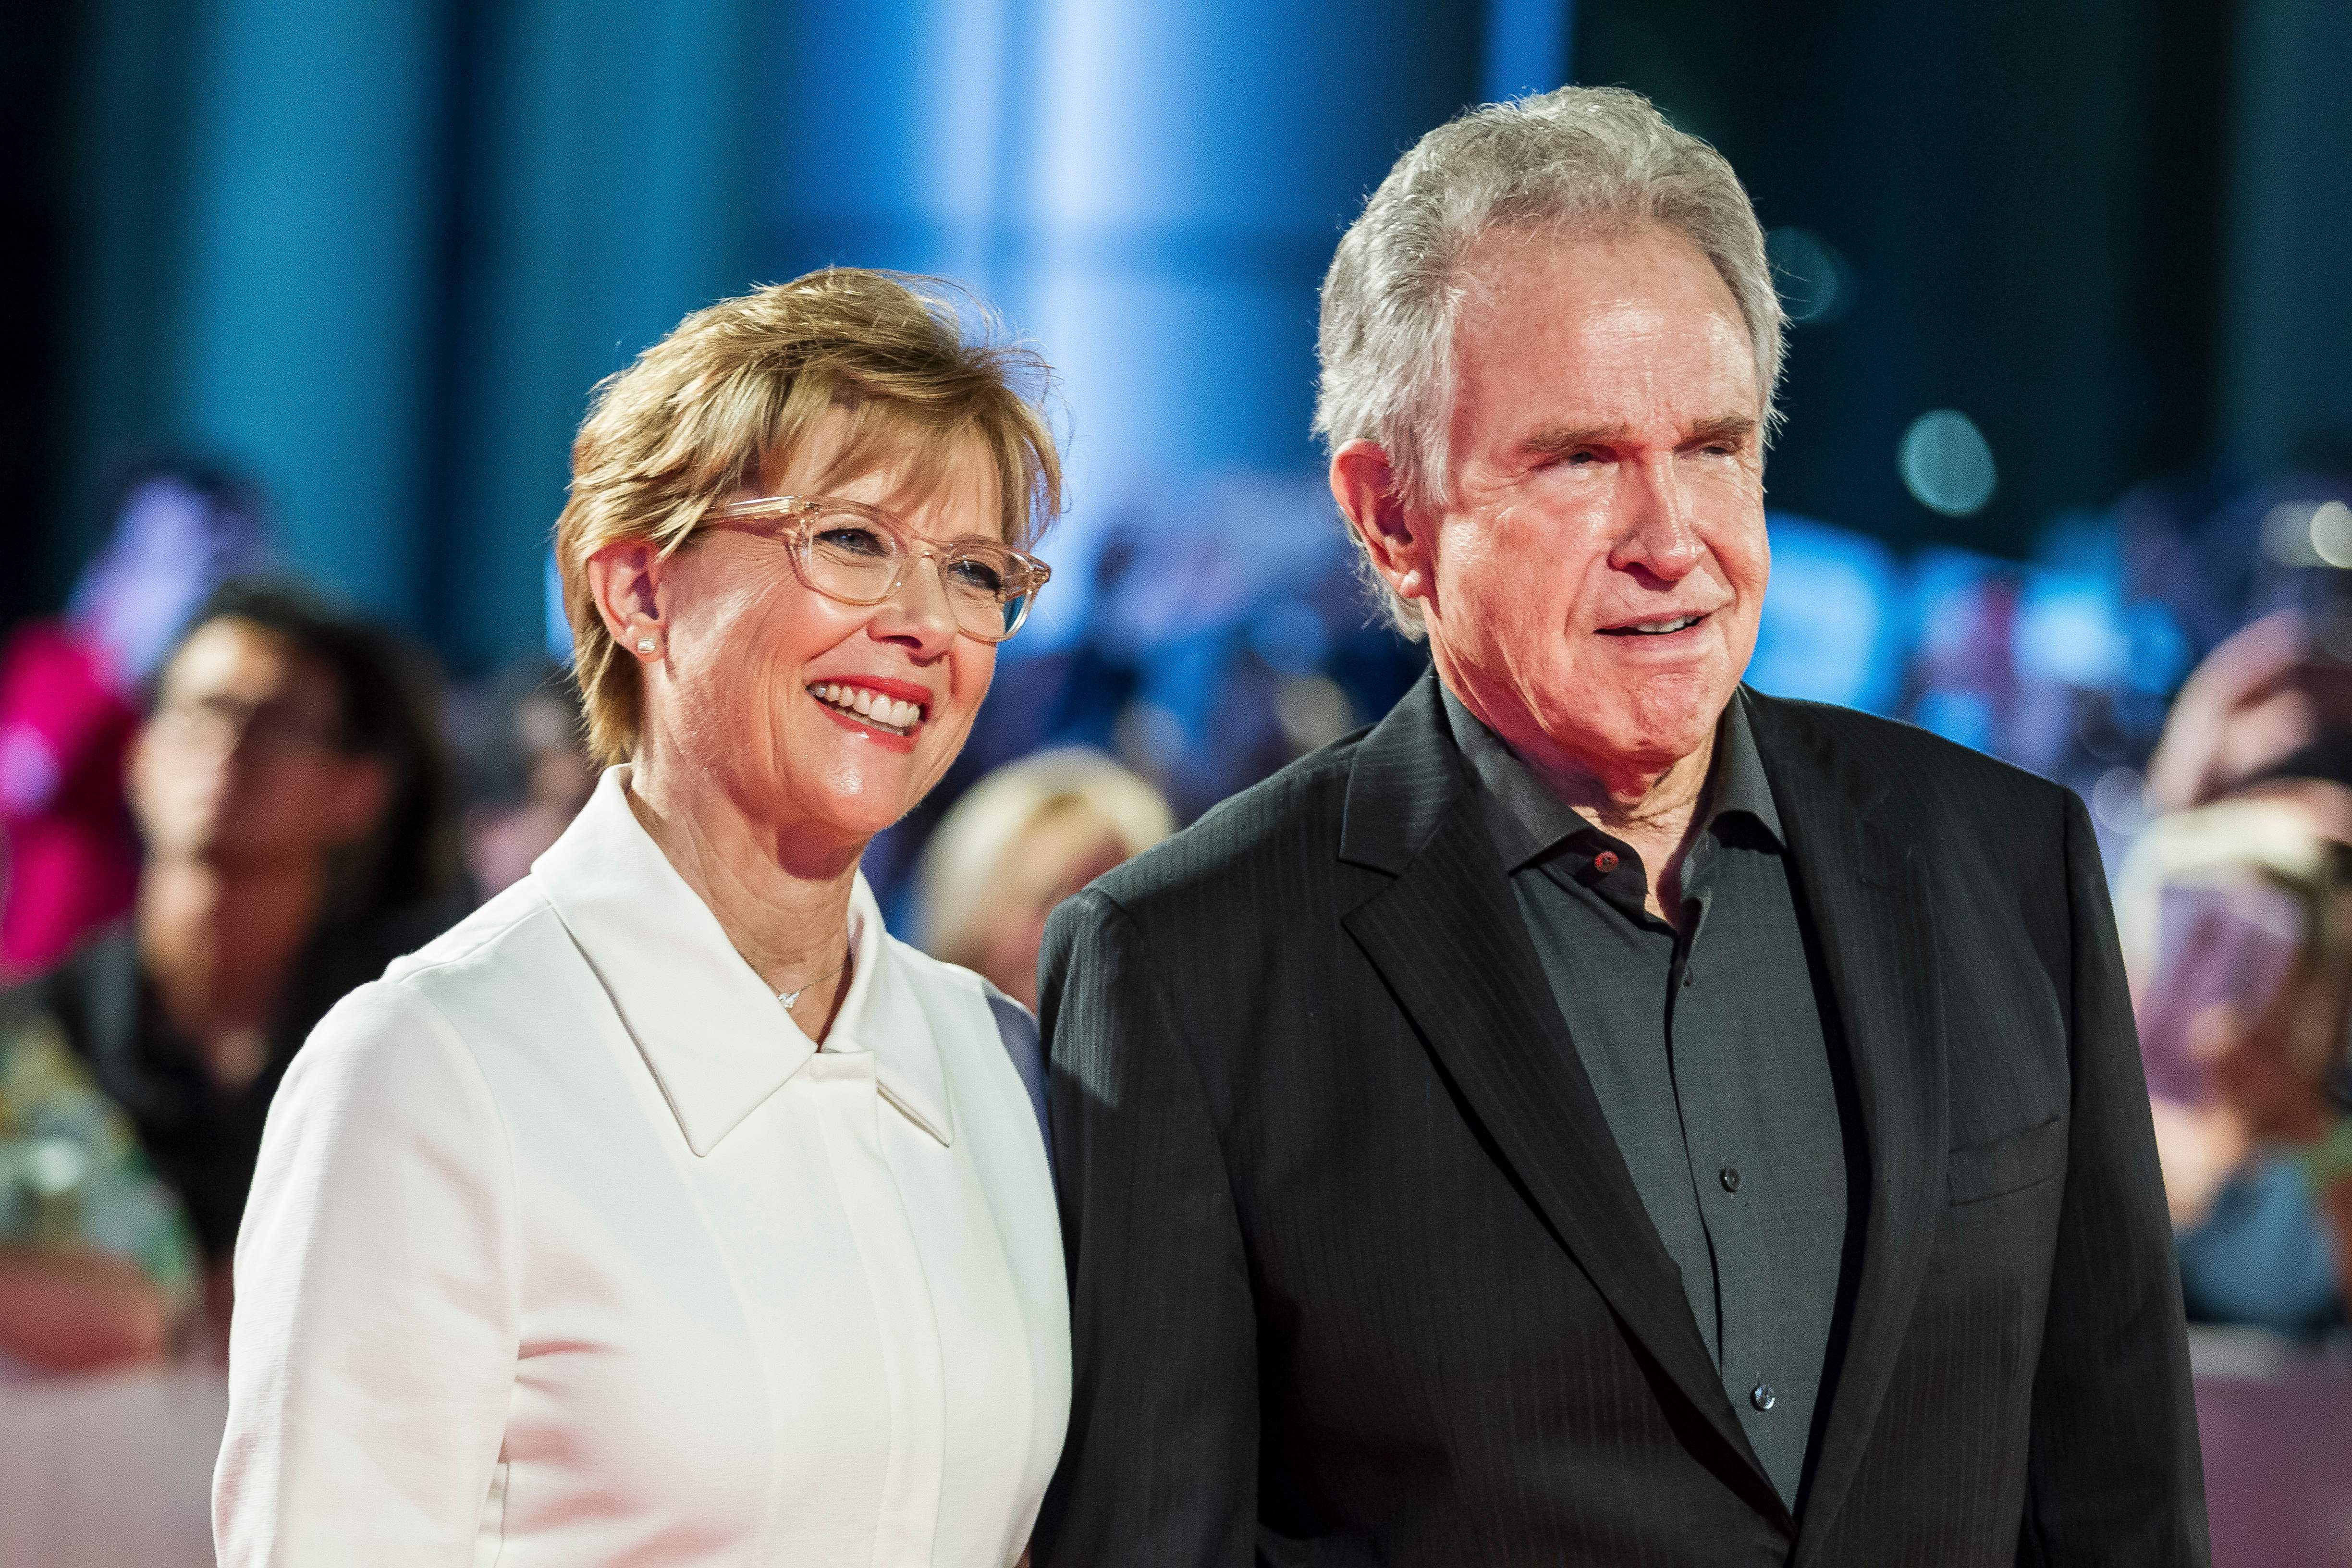 Annette Bening and Warren Beatty during the premiere of "Film Stars Don't Die in Liverpool" at the Toronto International Film Festival on September 12, 2017 in Toronto, Ontario | Source: Getty Images